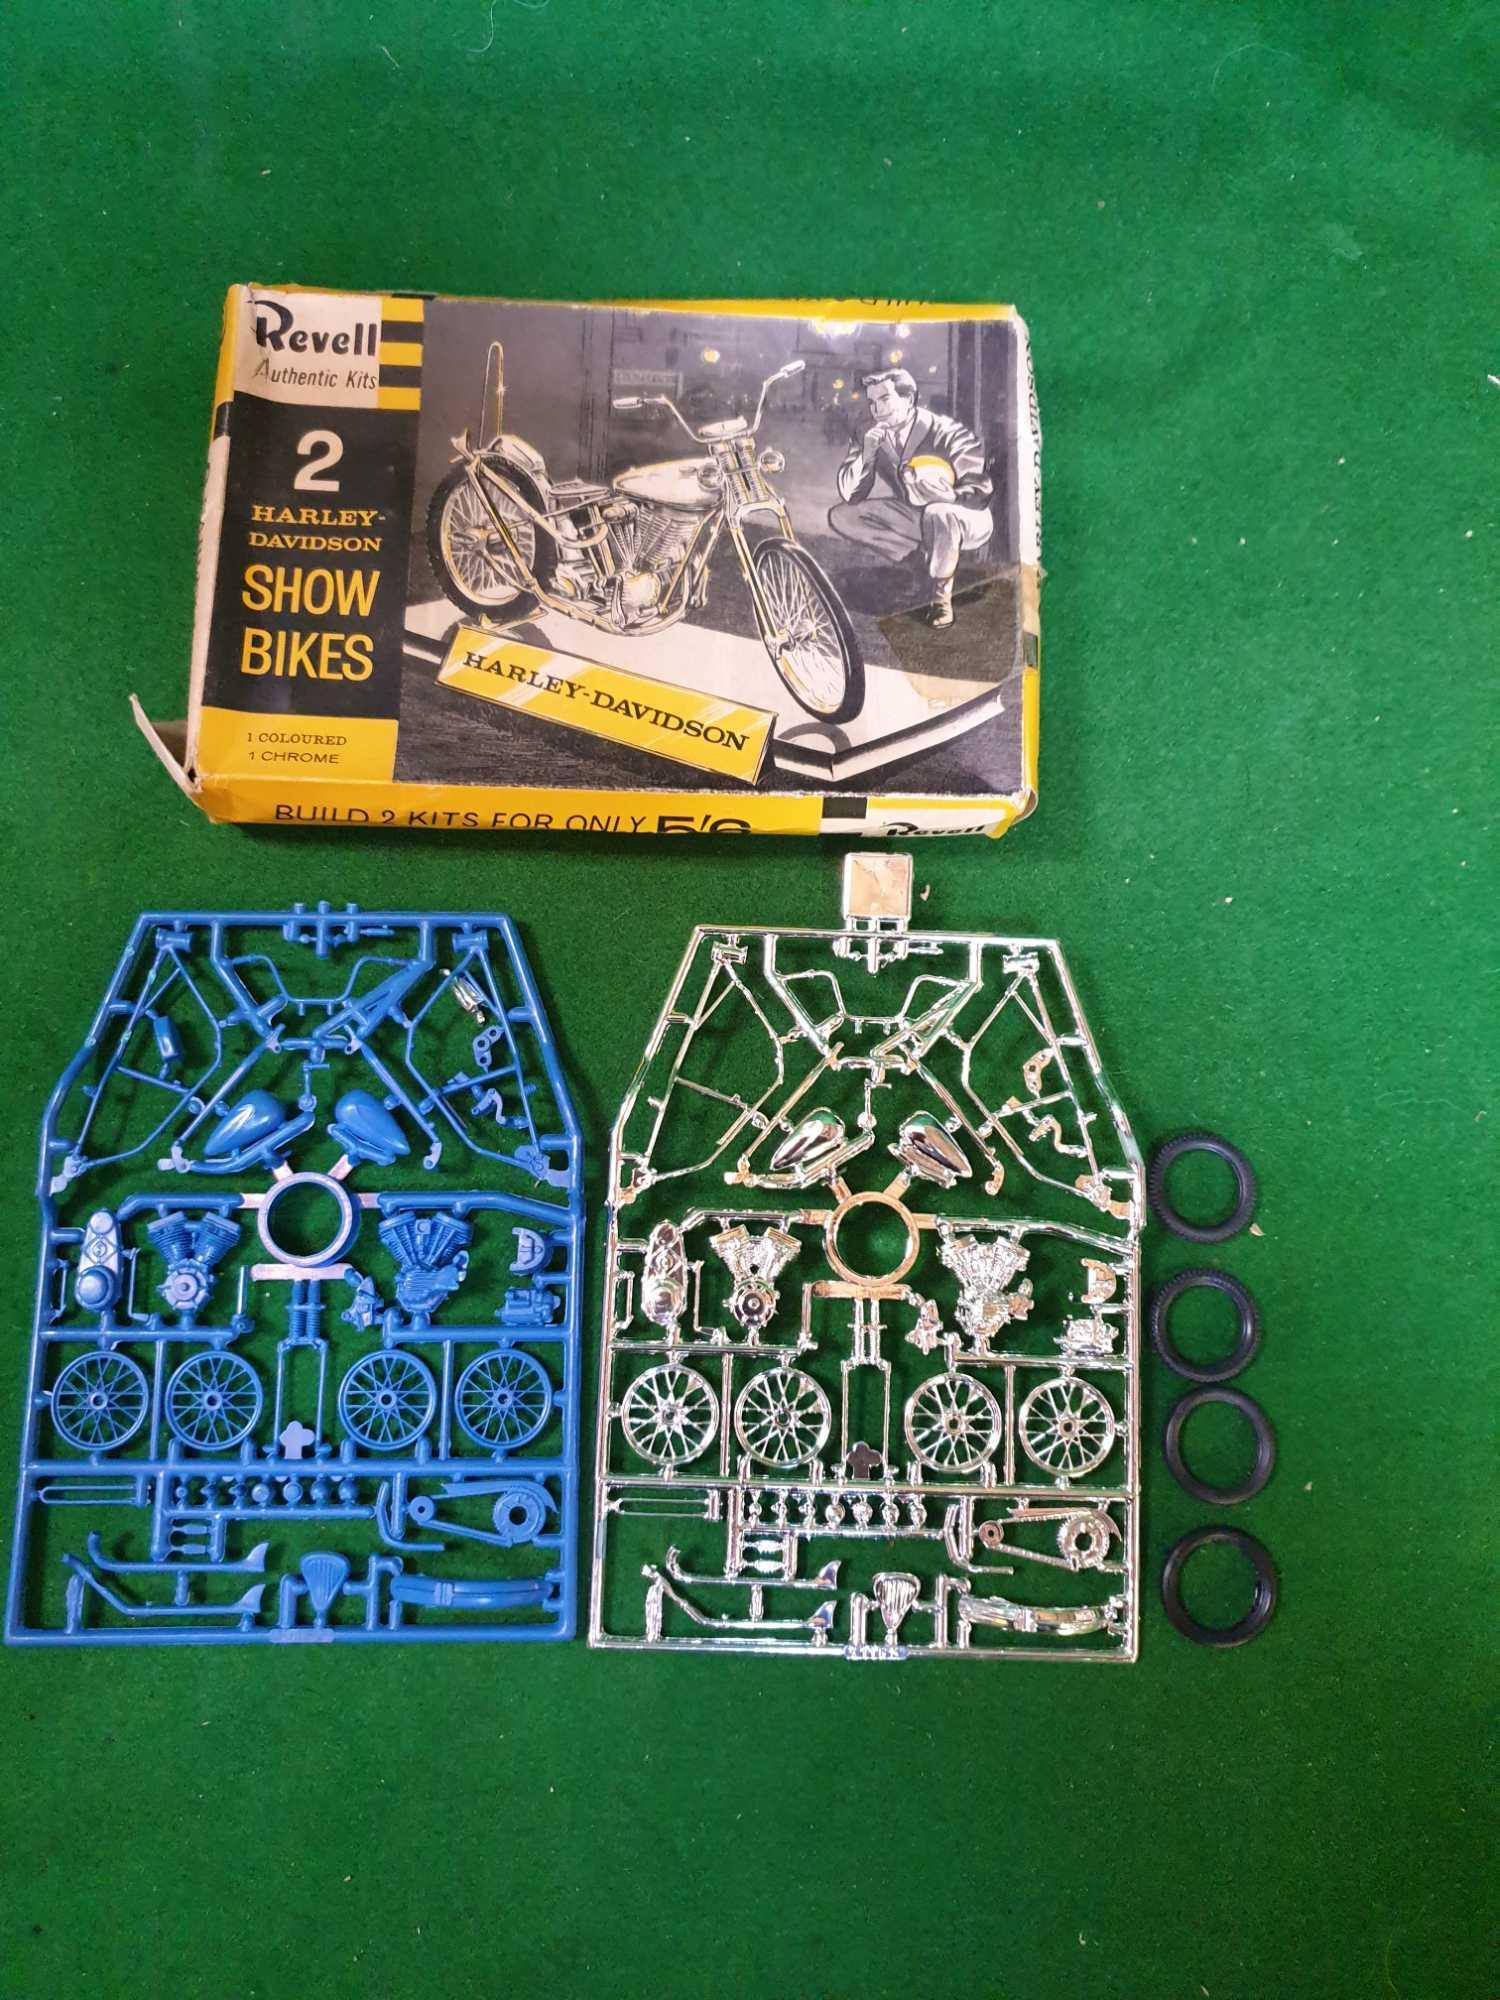 Revell Great Britain Very Rare # H-1292 1:25 Scale 2 Show Bikes Harley Davidson Still On Sprues - Image 2 of 3